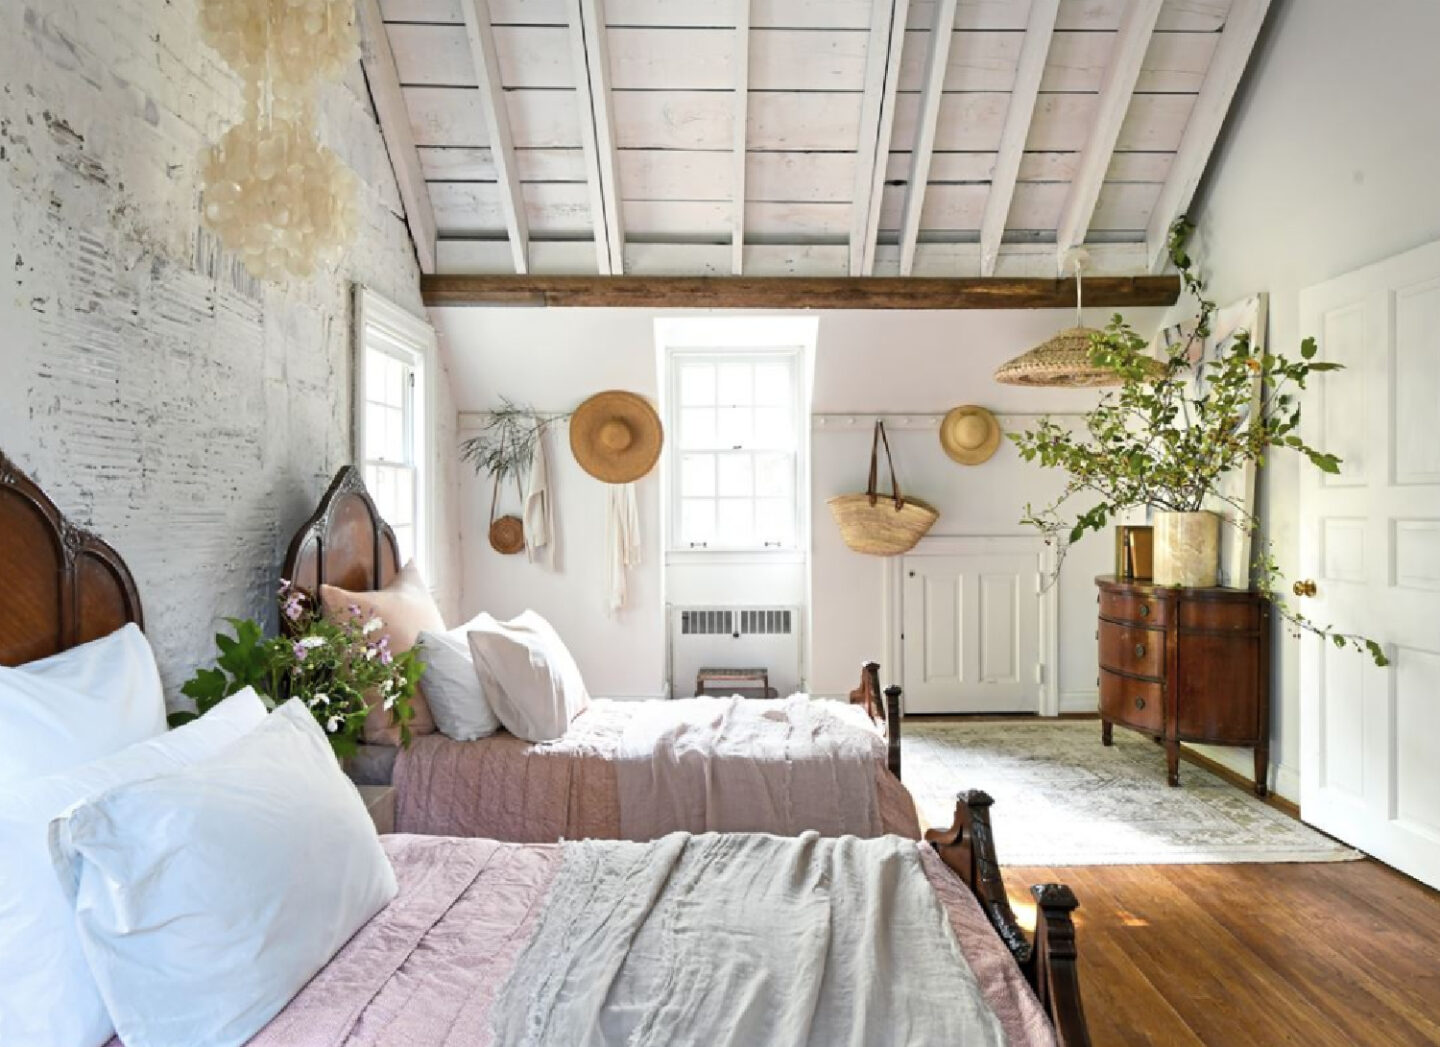 Leanne Ford designed rough luxe bedroom with exposed rafters painted white in her Pittsburgh guest cottage - photo by Erin Kelly for Pittsburgh Post Gazette. #modernrustic #vintagestyle